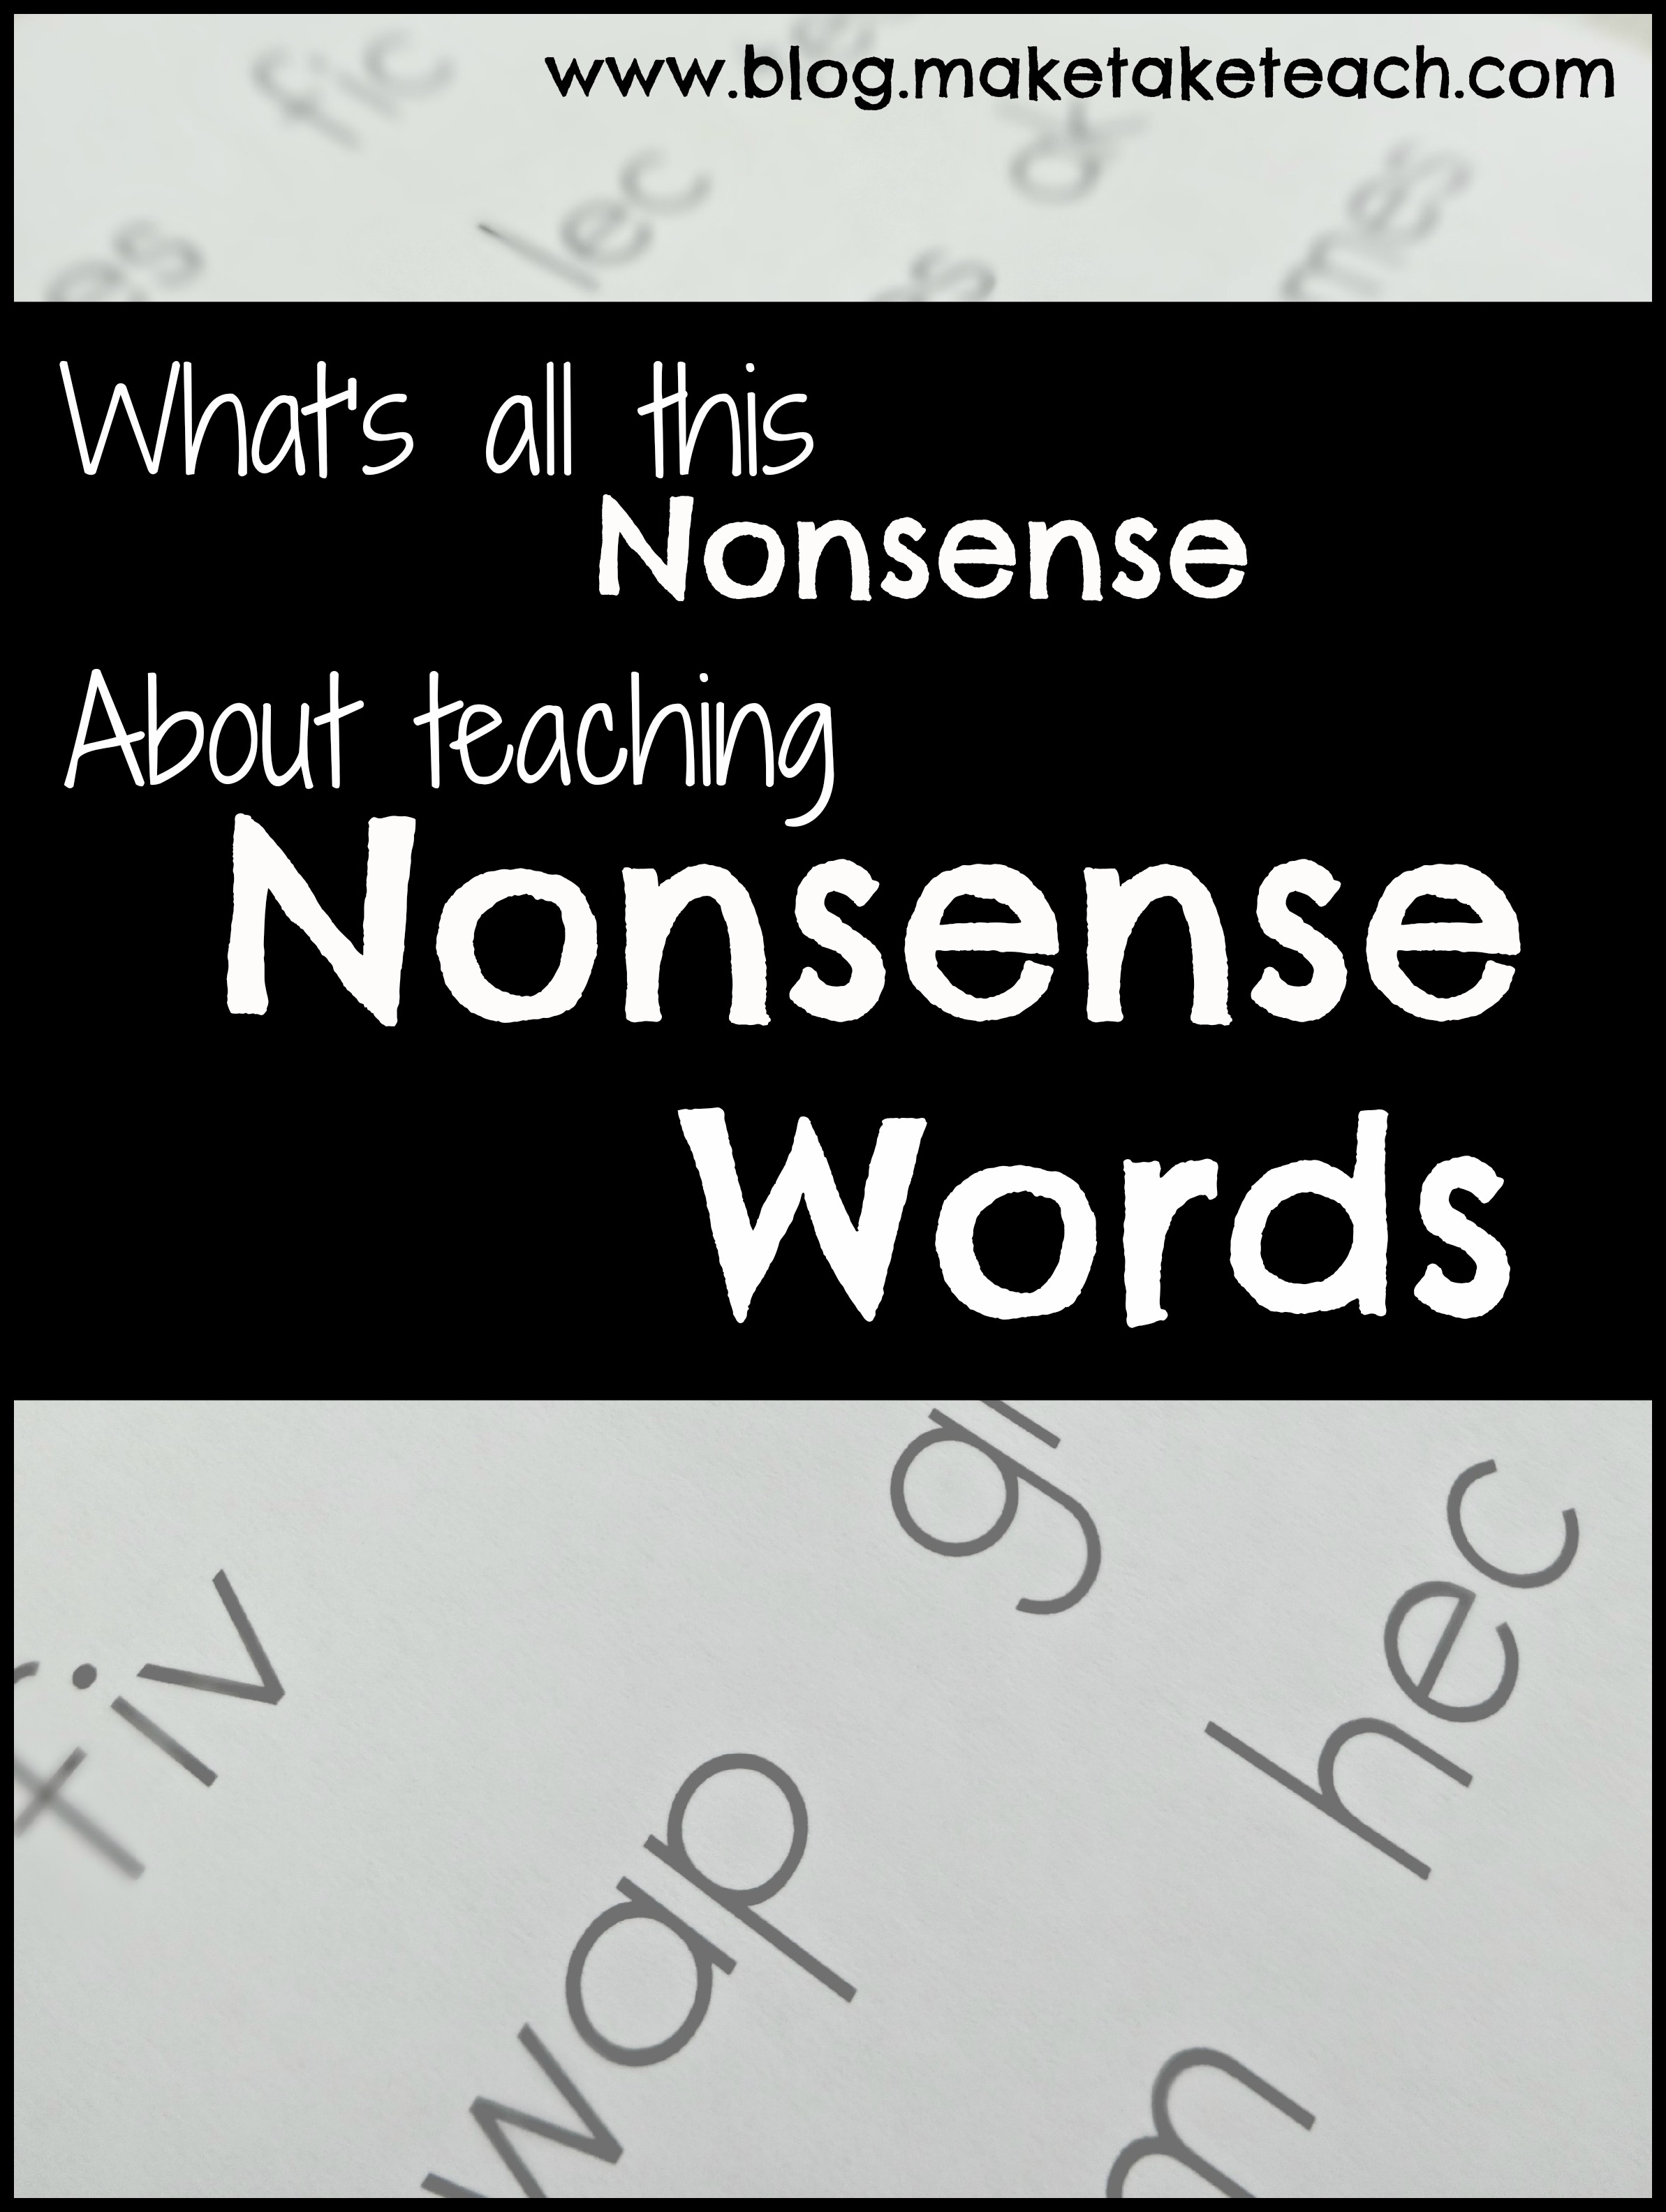 what-s-all-the-nonsense-about-teaching-nonsense-words-make-take-teach